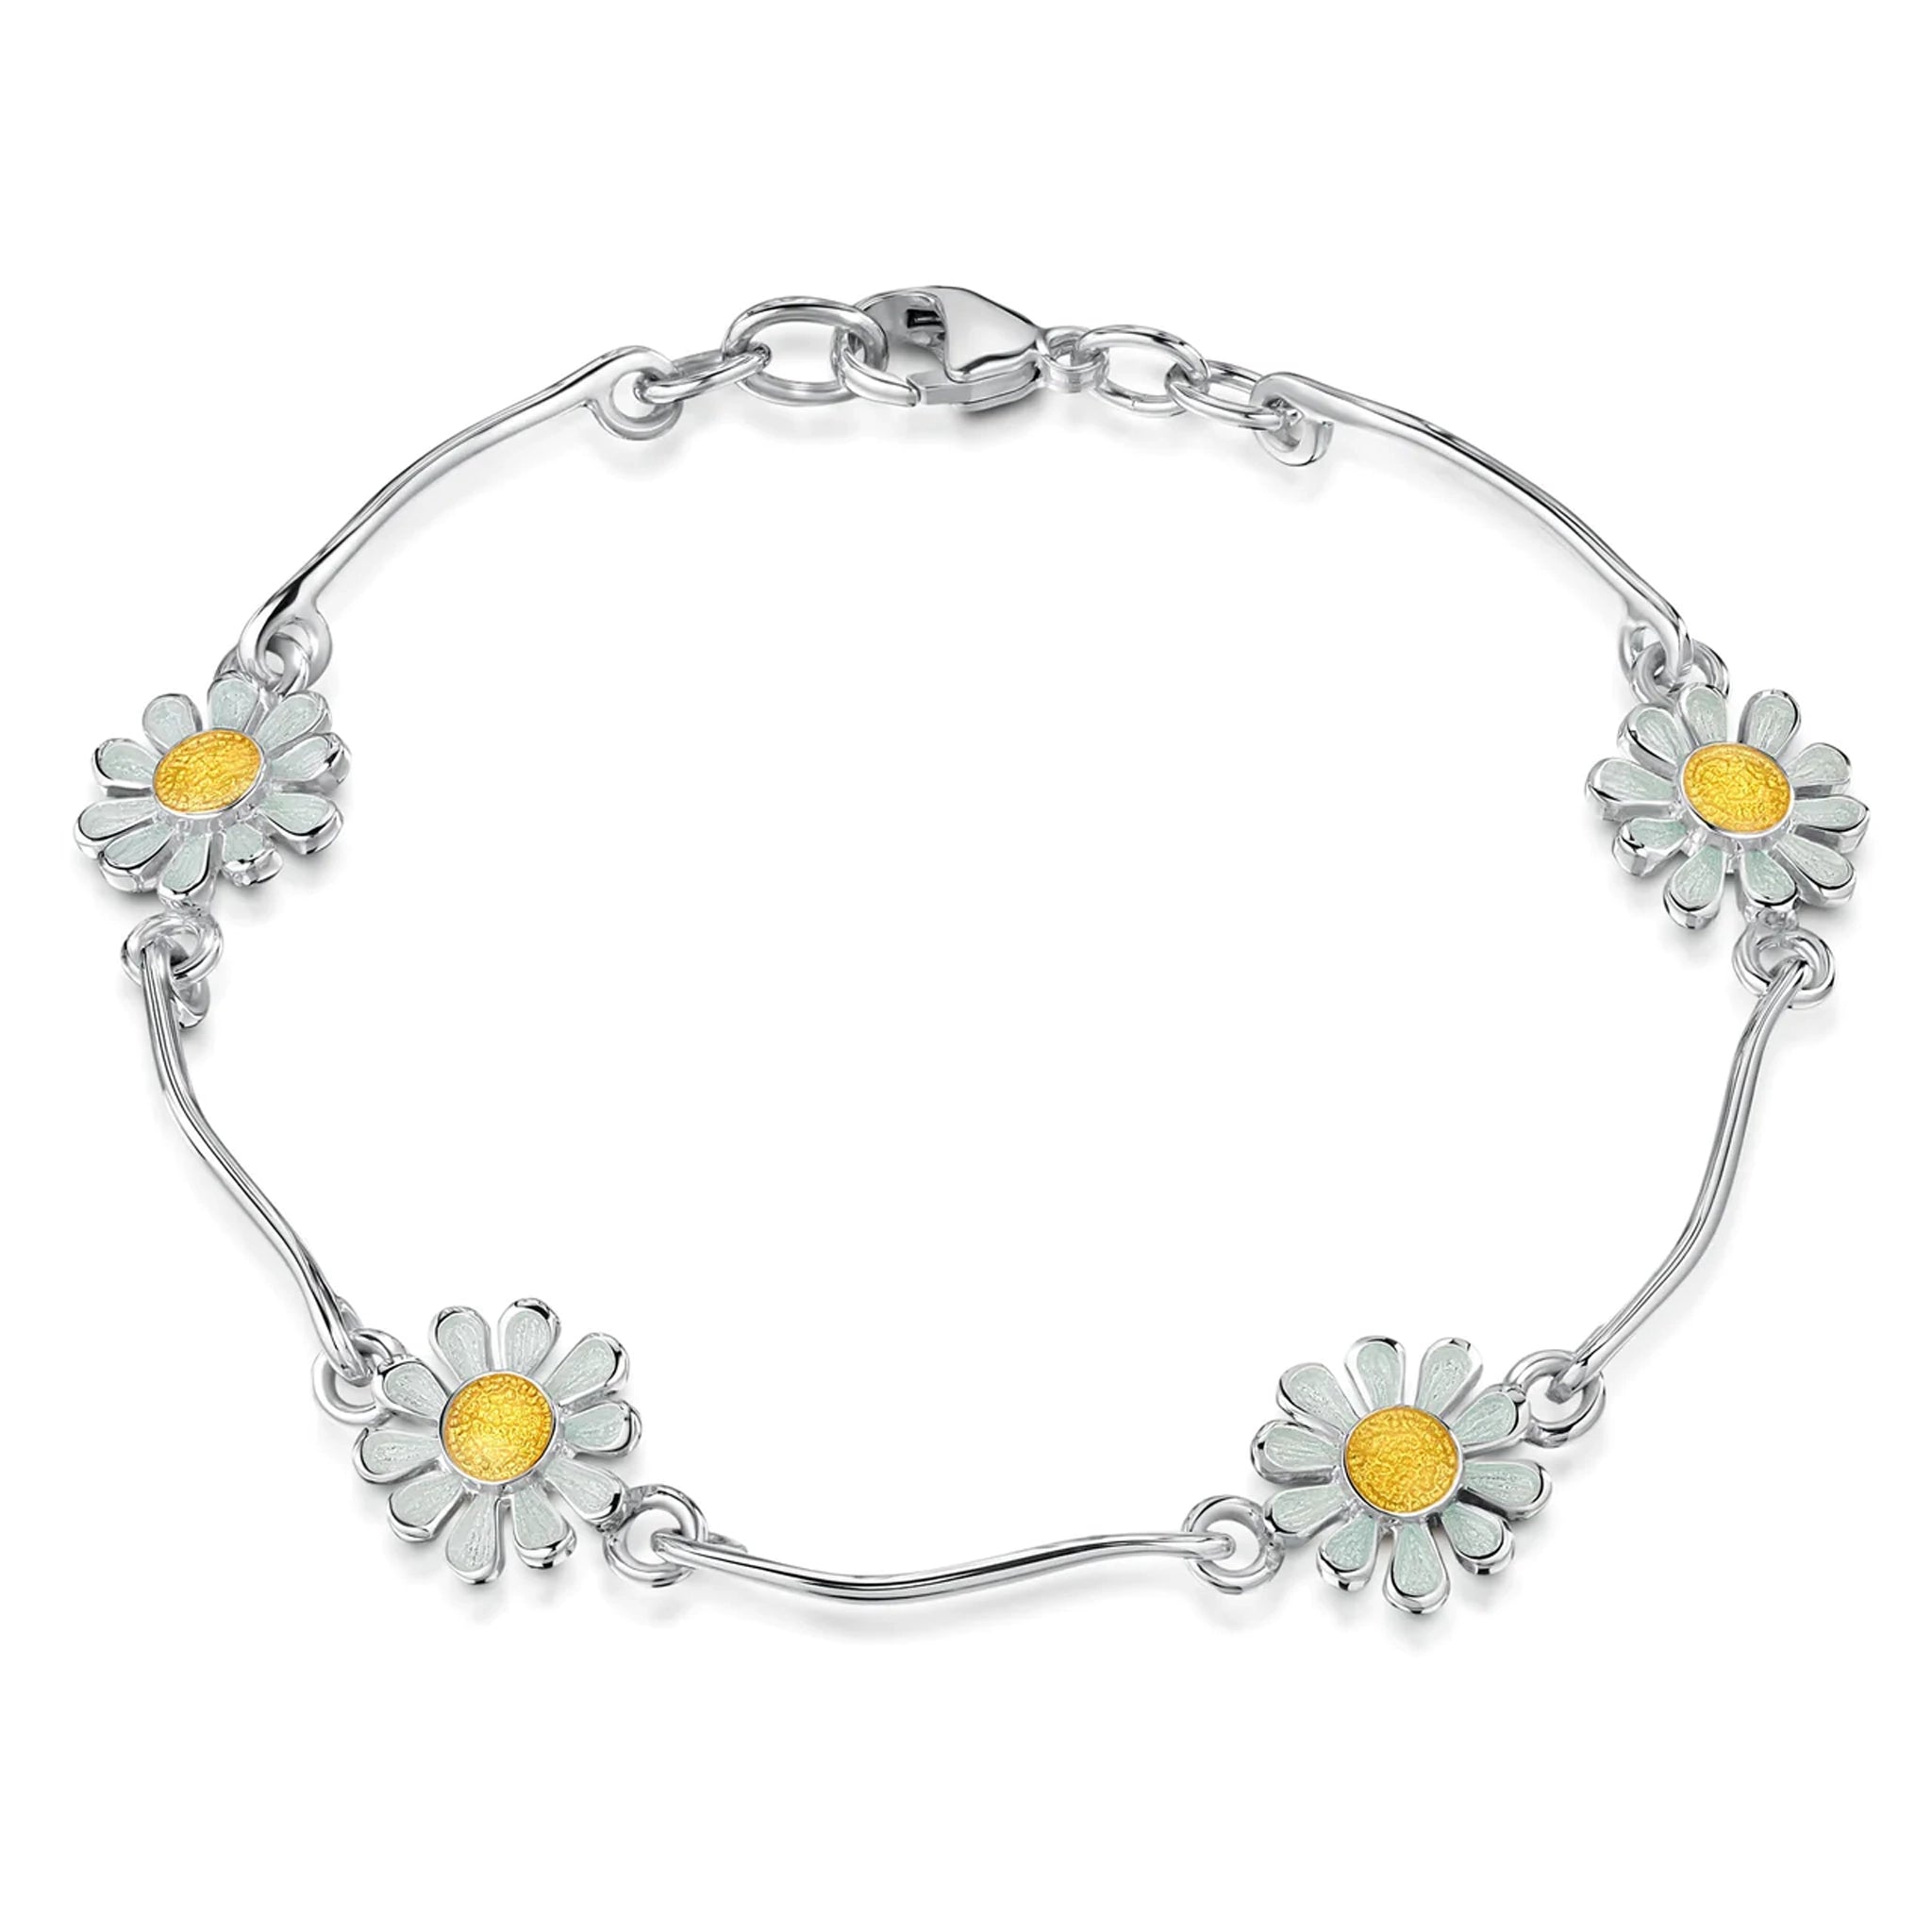 Polished silver bracelet with repeat silver bars and daisy pendants in white and yellow enamel